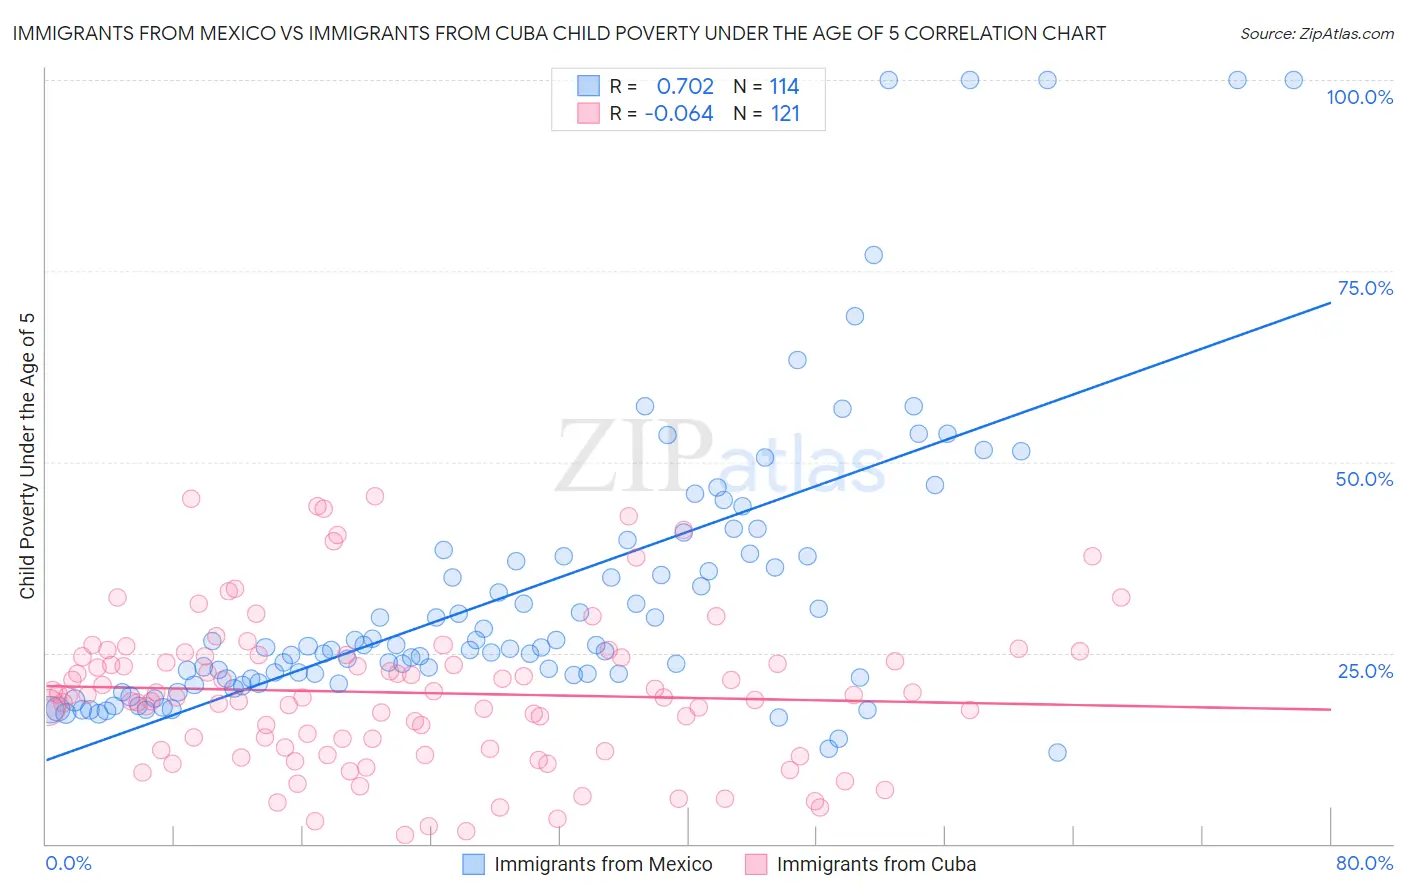 Immigrants from Mexico vs Immigrants from Cuba Child Poverty Under the Age of 5